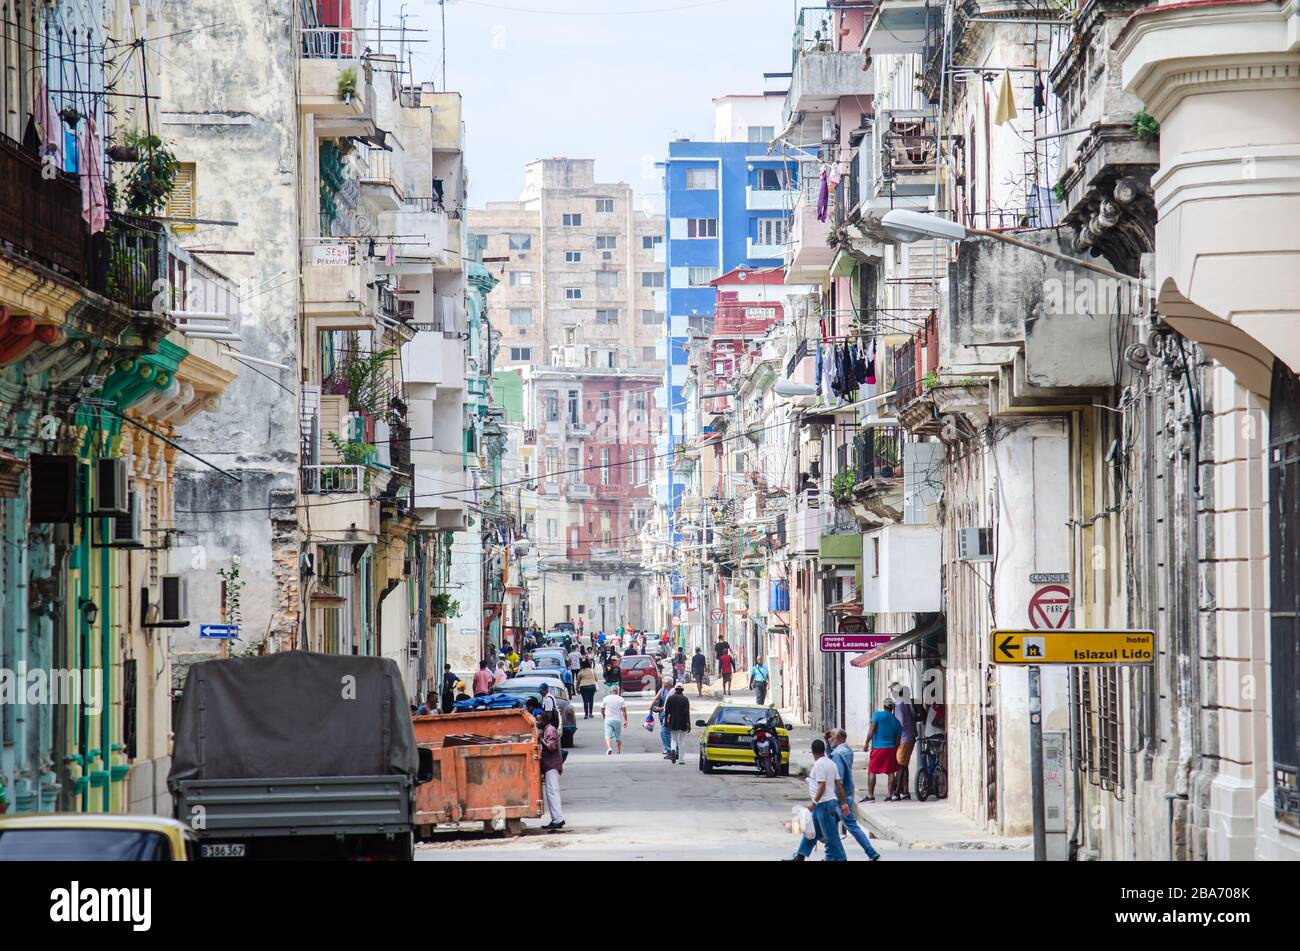 Landscape view of a typical street in Habana in Cuba Stock Photo